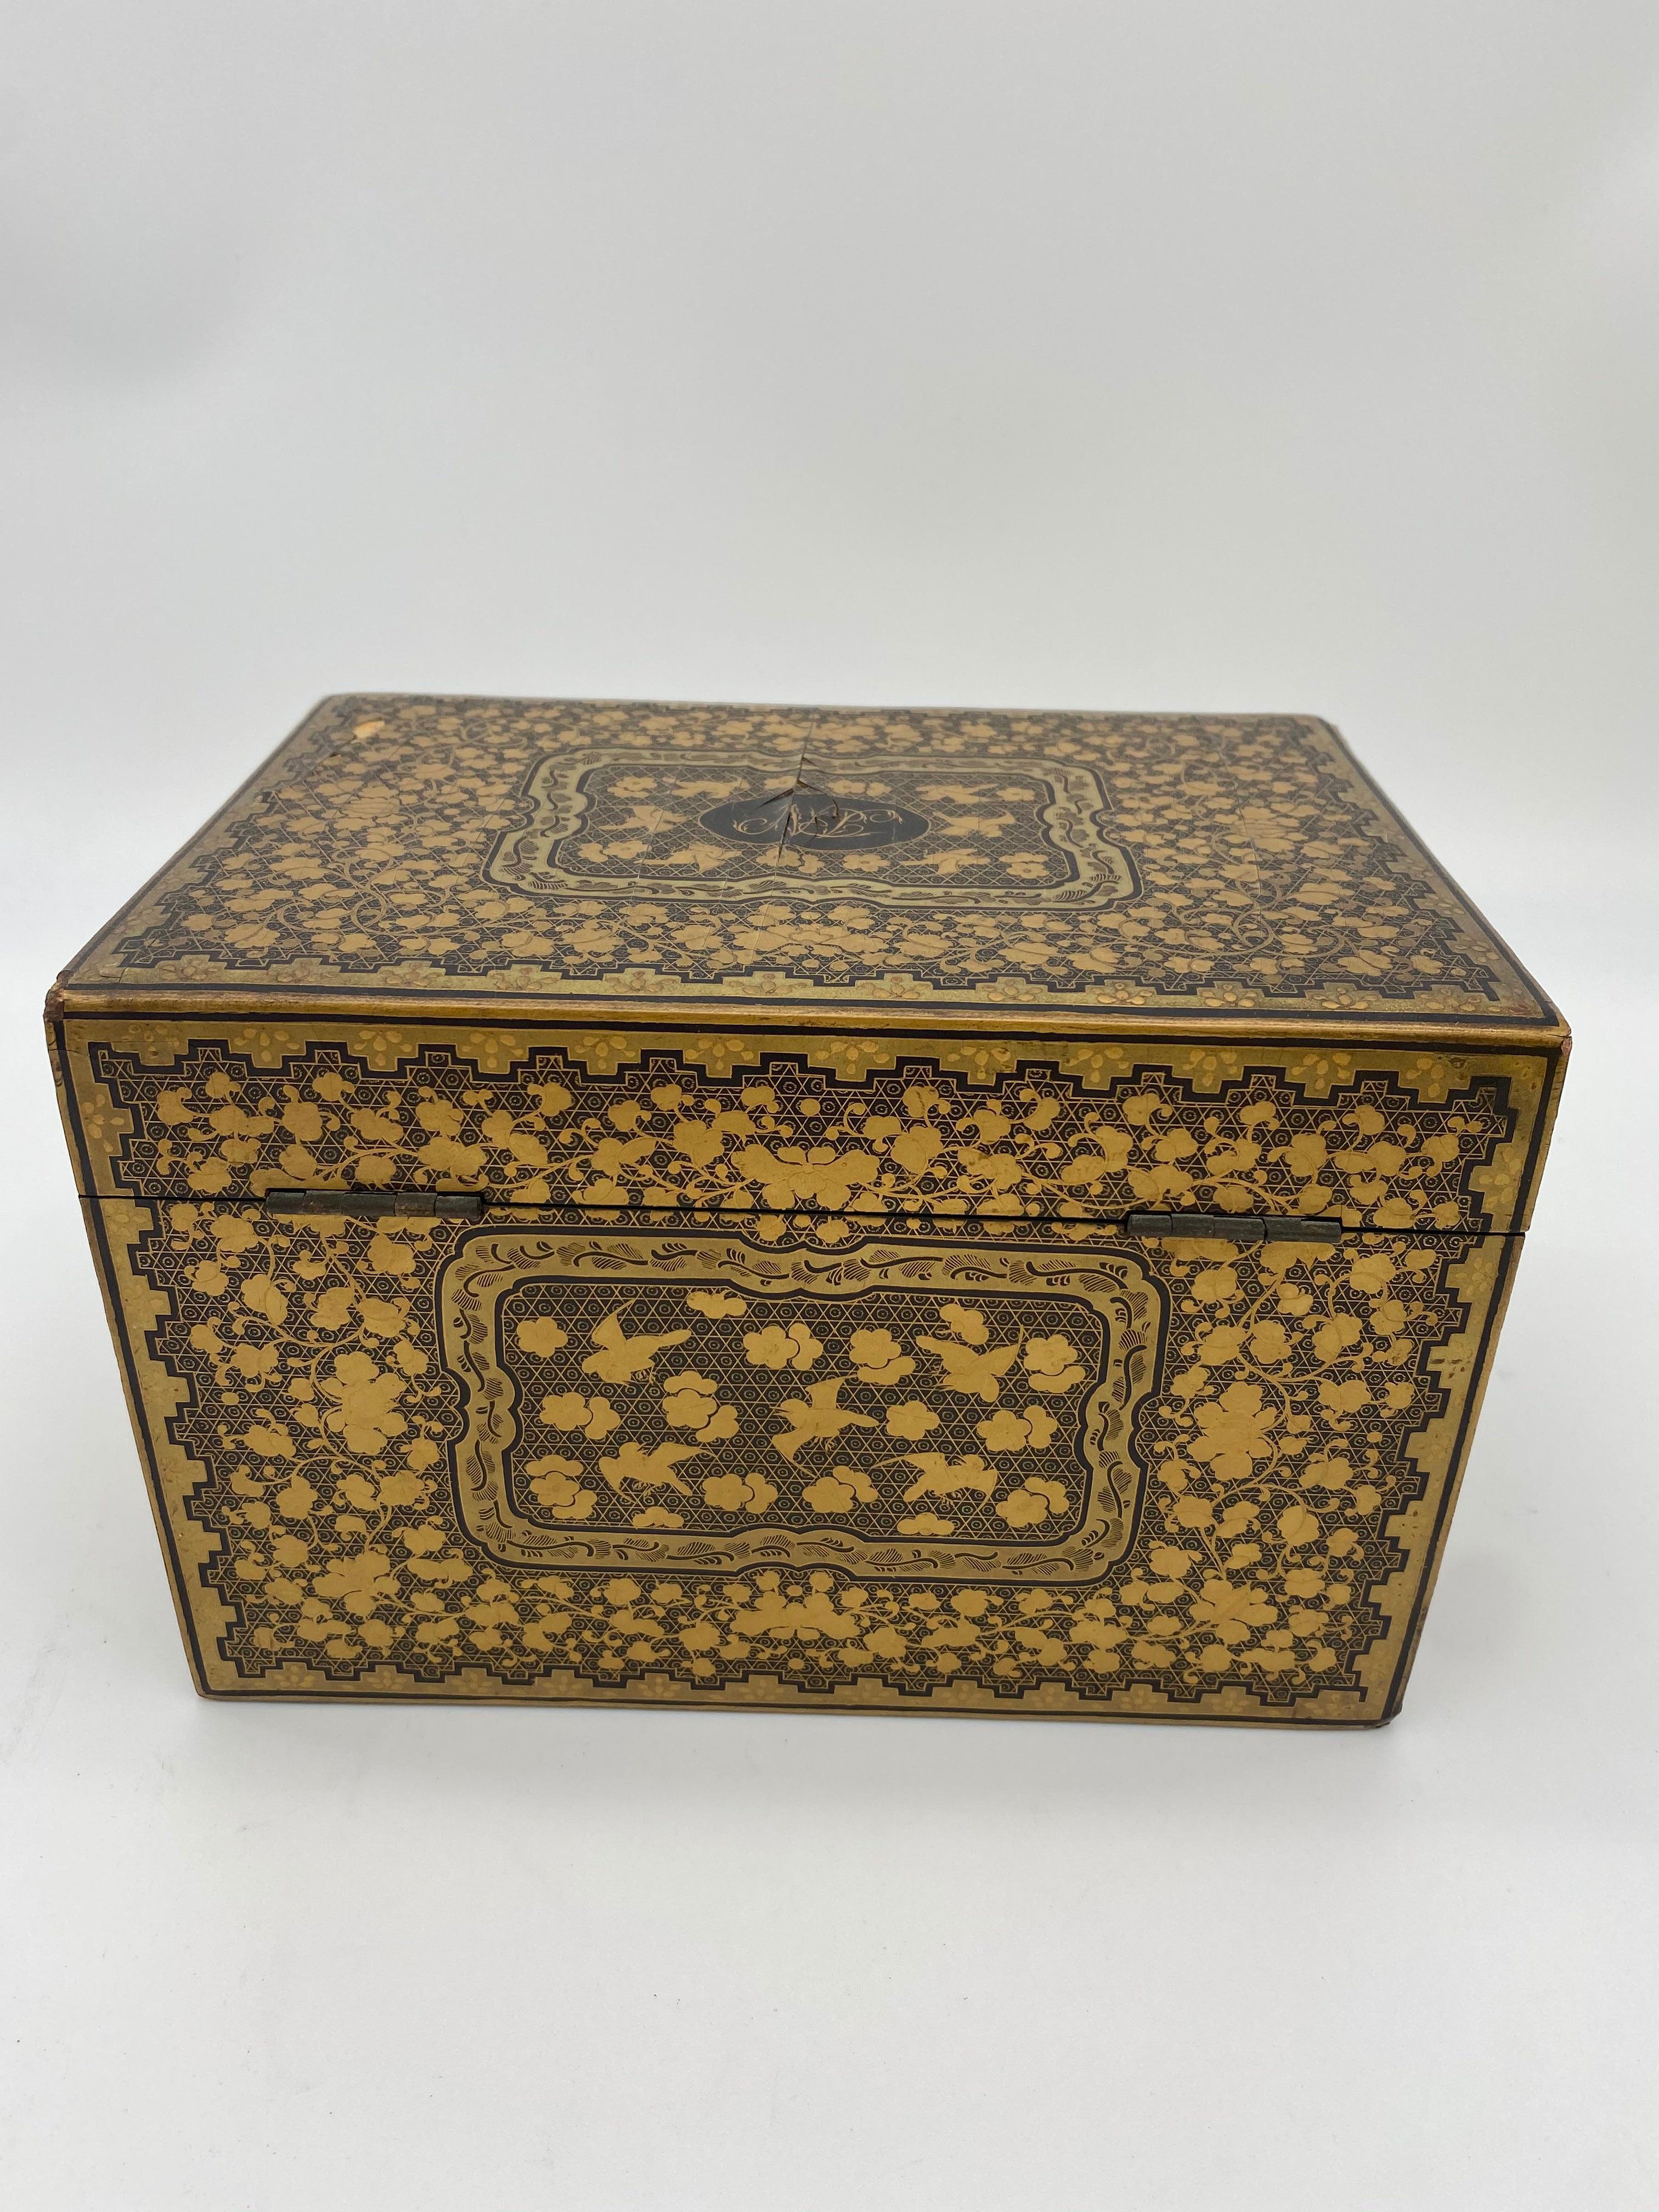 19th century lift-lid gilt-decorated goldenblack lacquer Chinese tea caddy, small and beautiful piece.